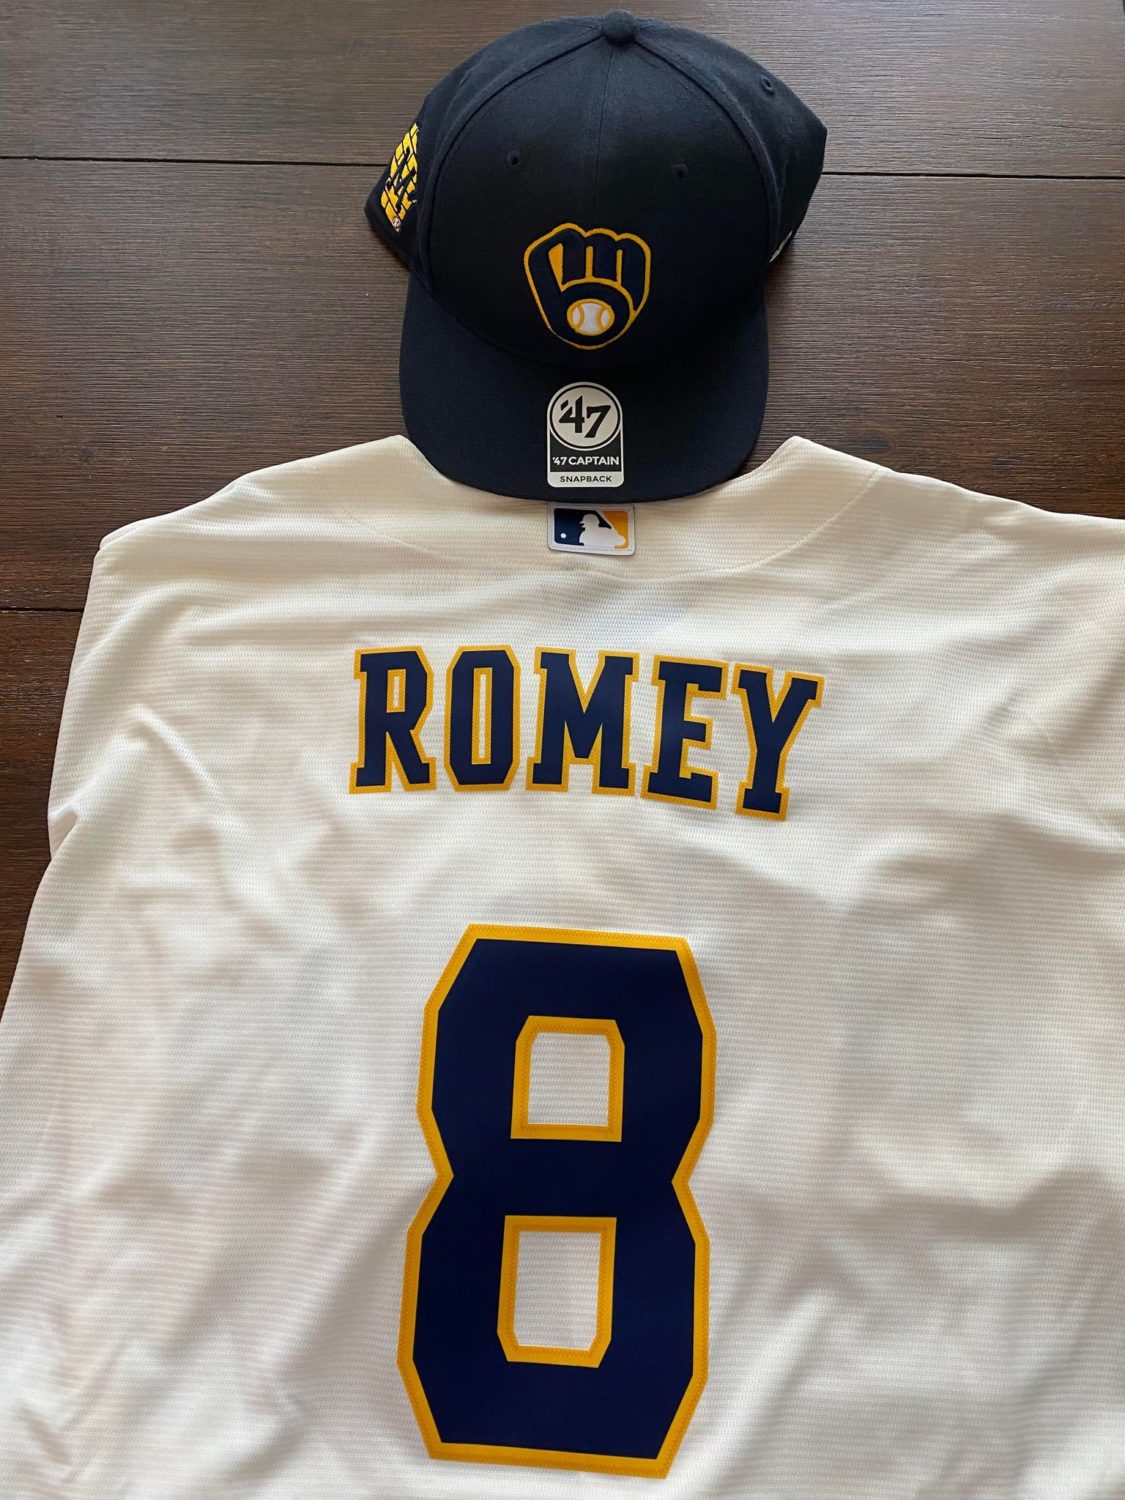 Madison rapper Romey to throw out ceremonial first pitch at Brewers/Yankees  game tonight